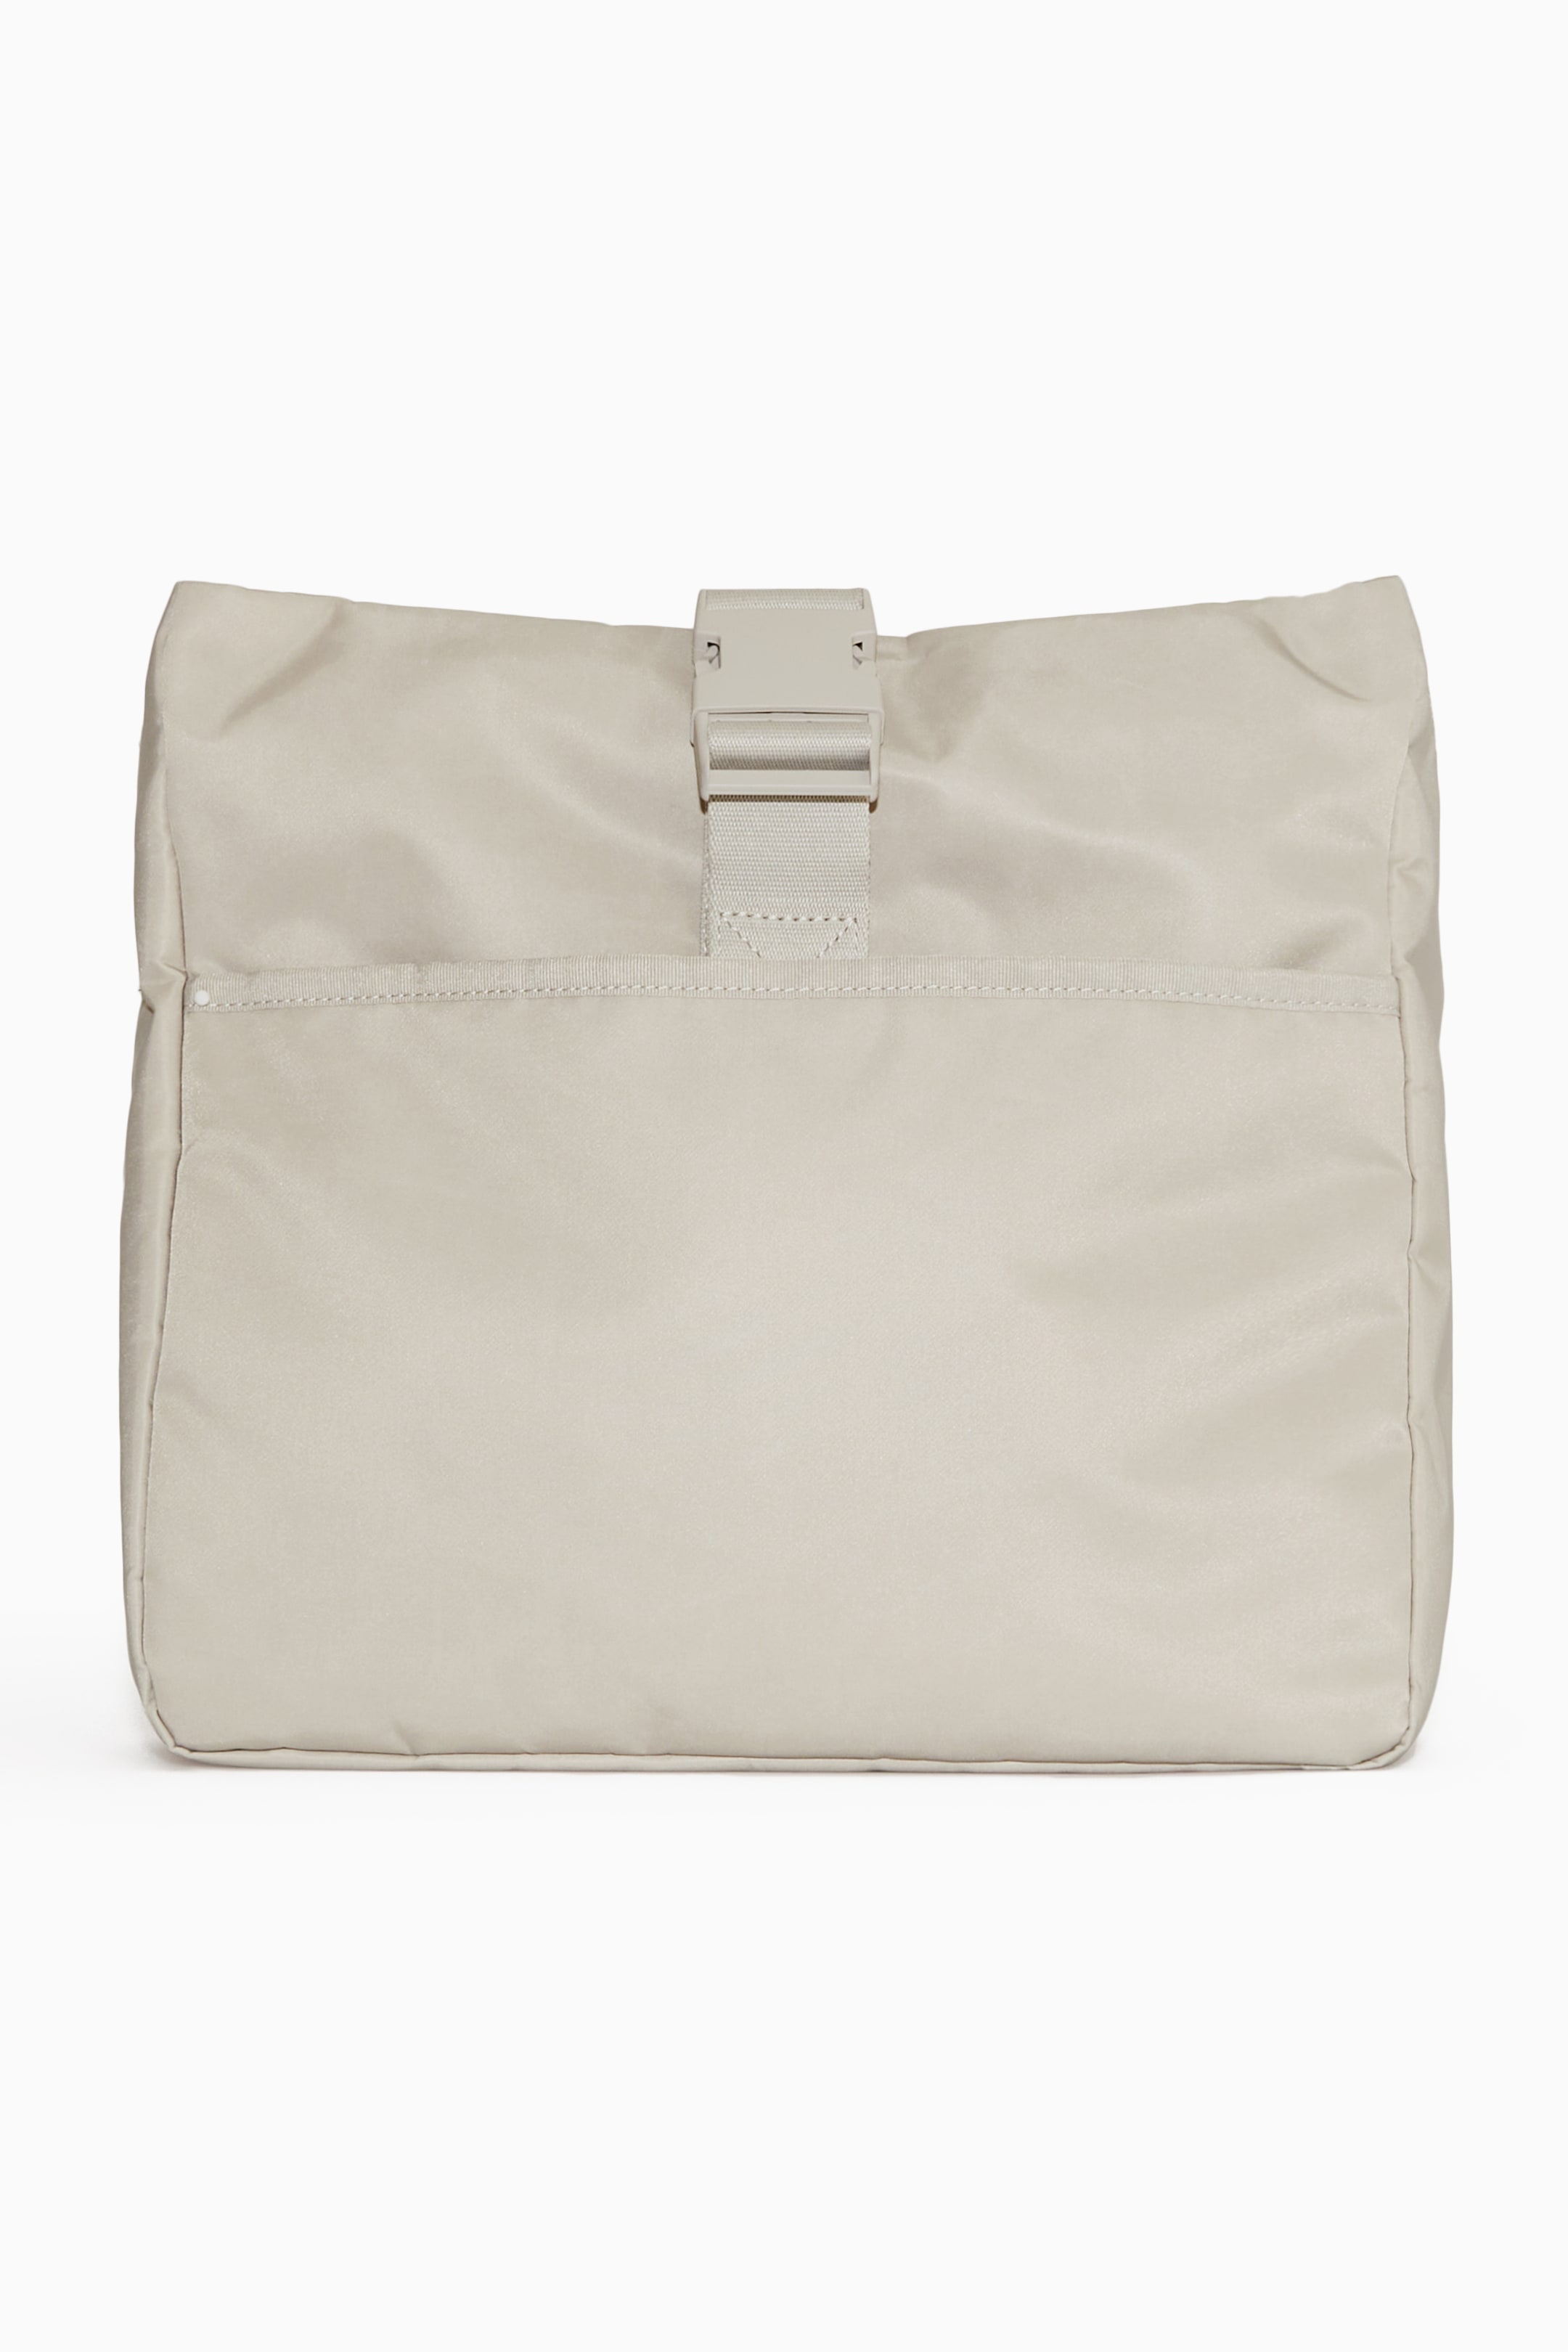 Front image of cos NYLON SMALL MESSENGER BAG in LIGHT GREY